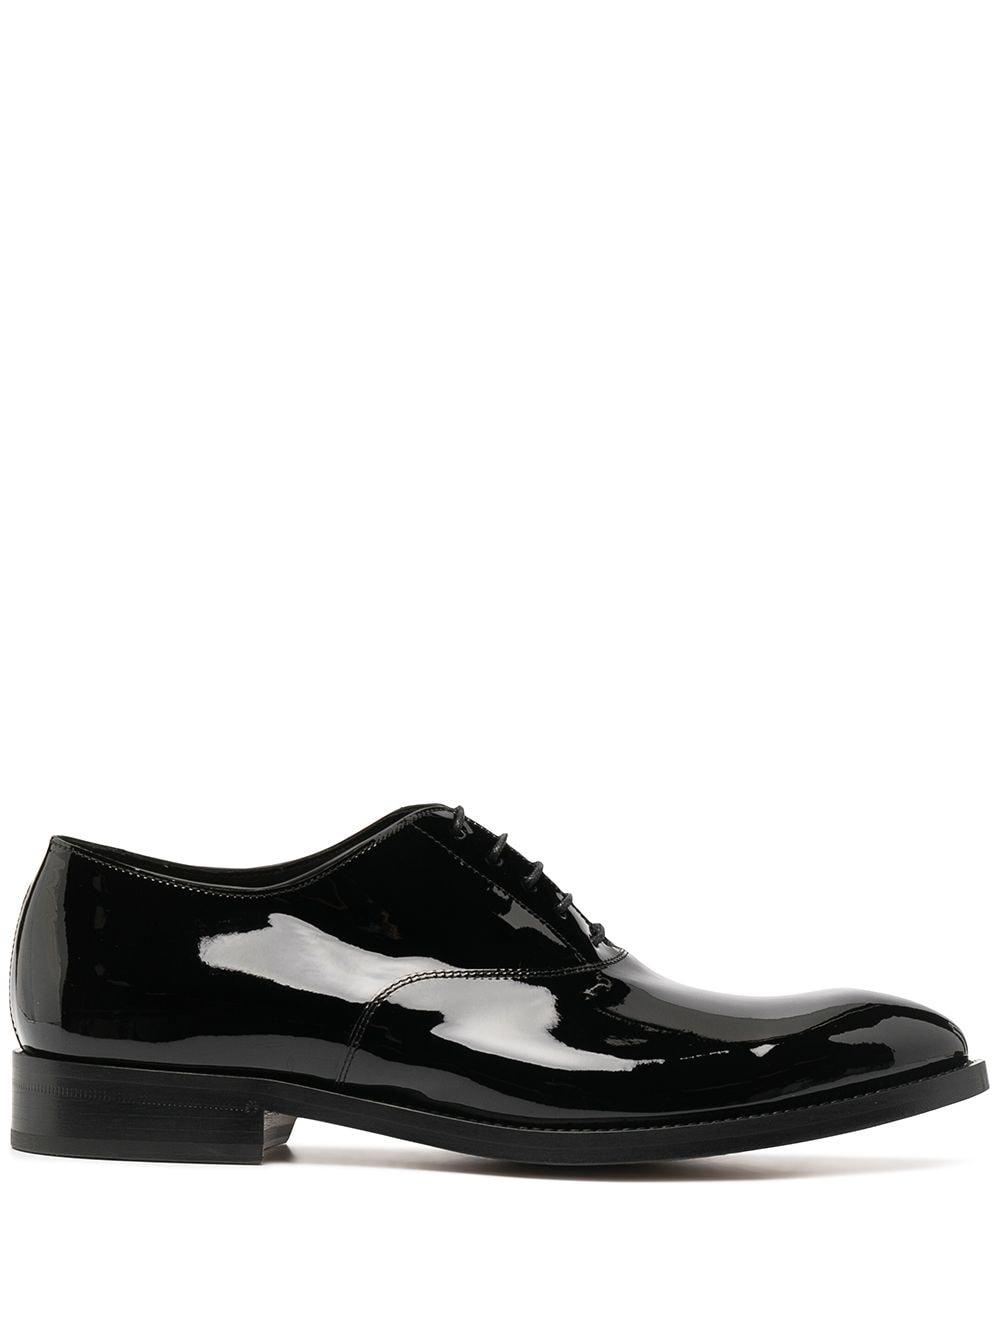 shiny lace-up oxford shoes by PAUL SMITH